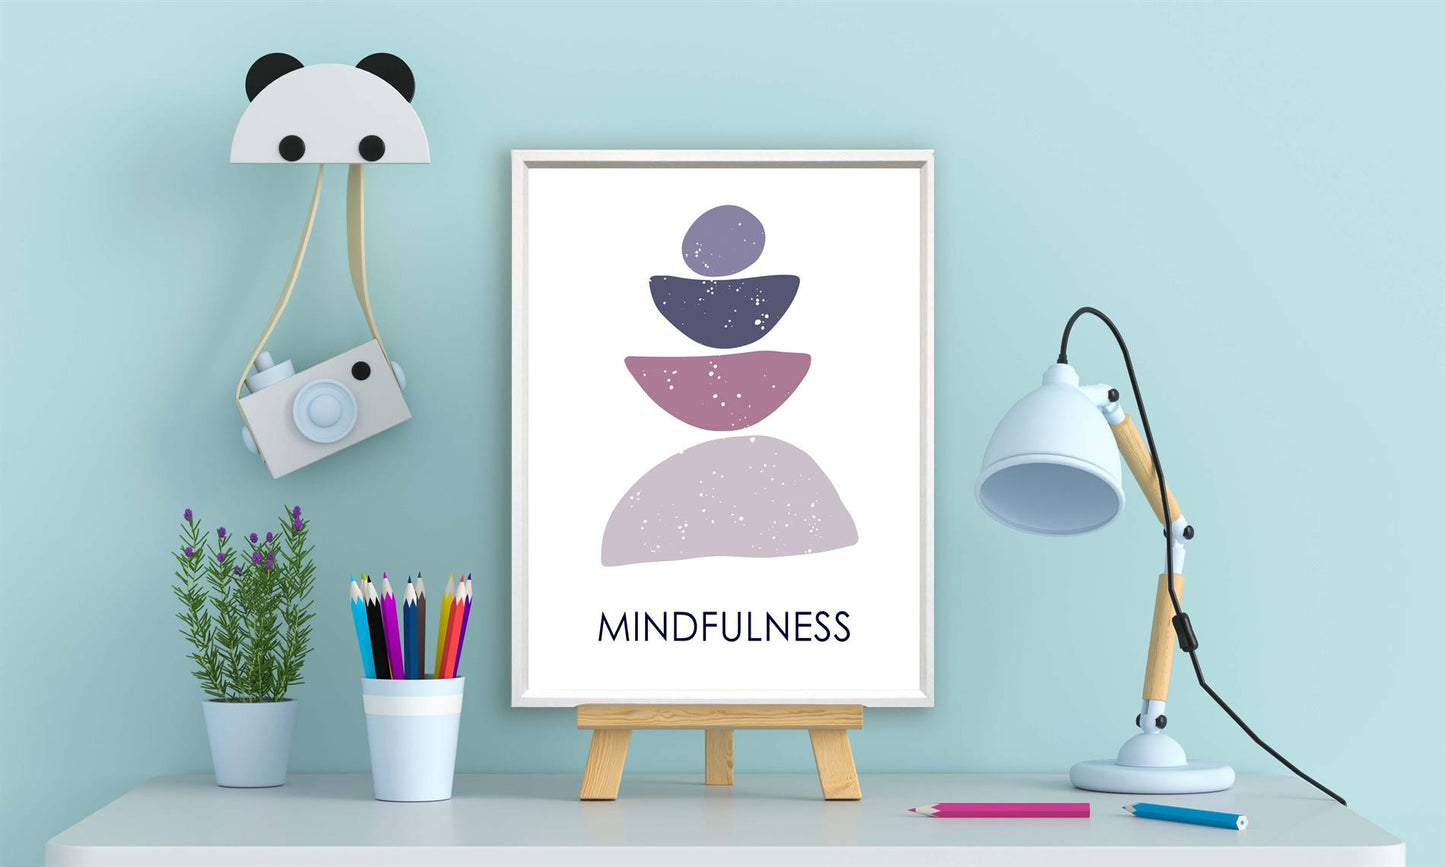 Mindfulness Mindfulness / Concentreren - Mindfulness / Abstract